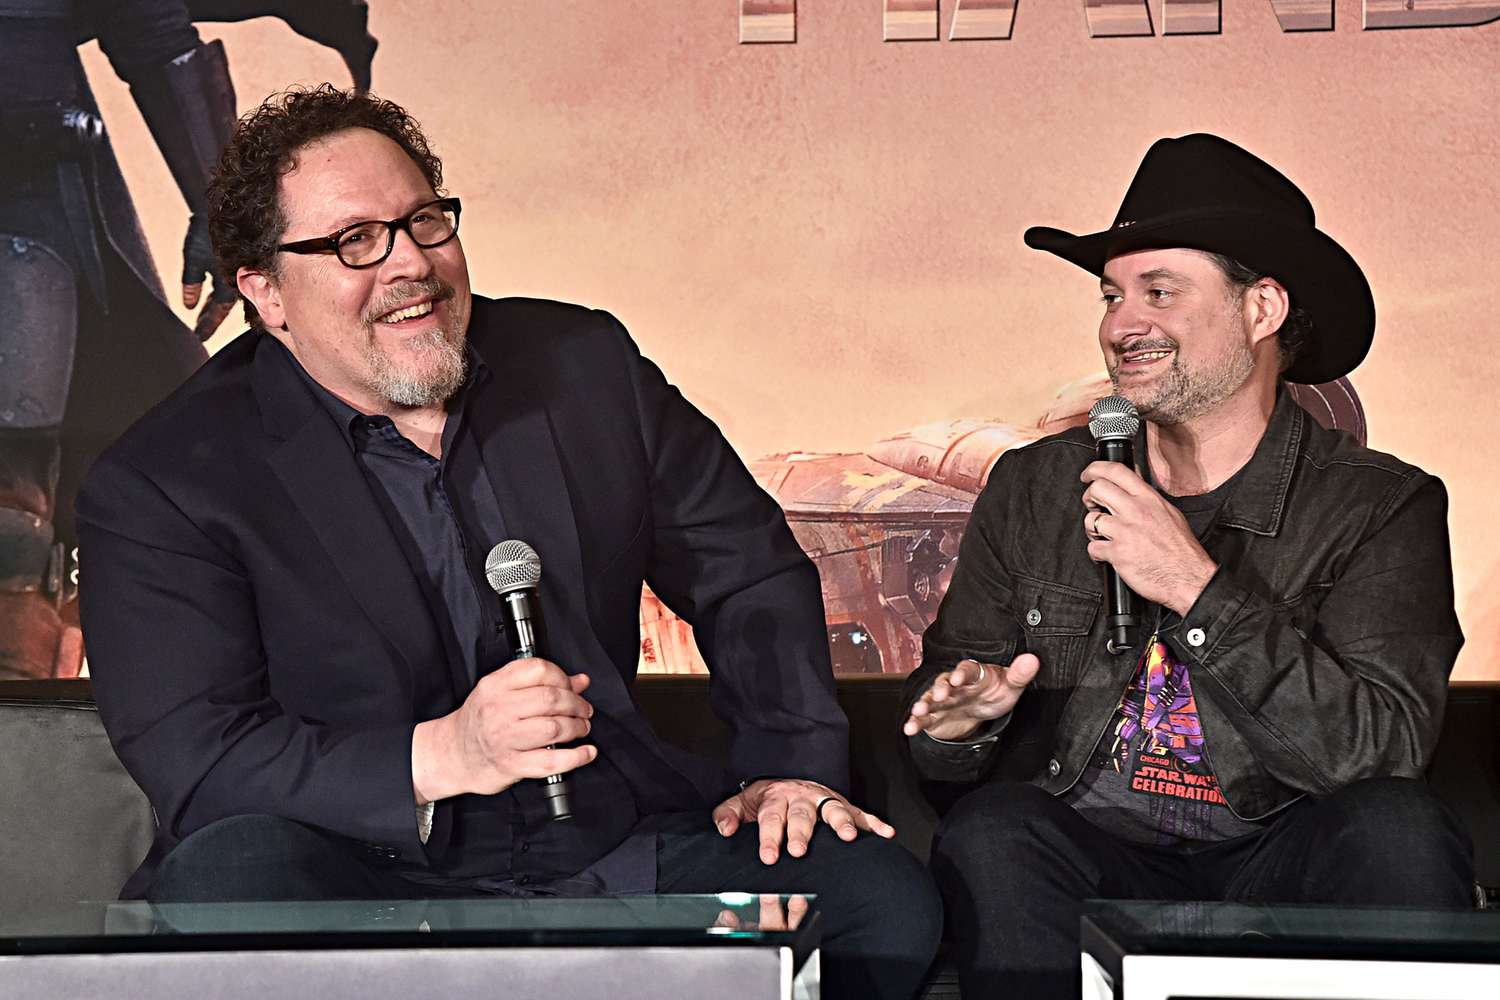 Jon Favreau (L) and Dave Filoni of Lucasfilm's "The Mandalorian" at the Disney+ Global Press Day on October 19, 2019 in Los Angeles, California.